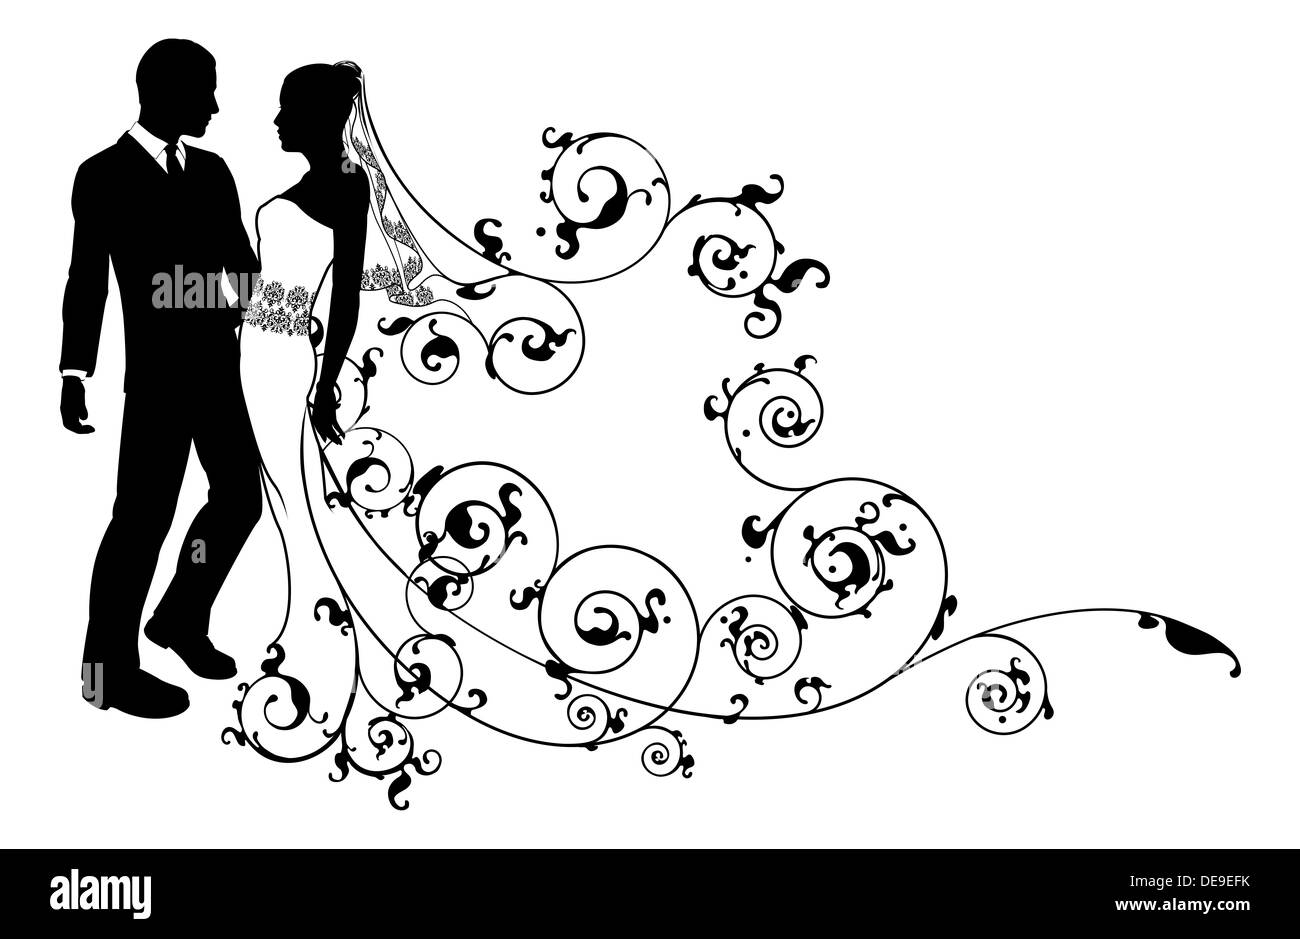 Bride and groom wedding couple in silhouette with abstract floral pattern. Could be having their first dance. Stock Photo